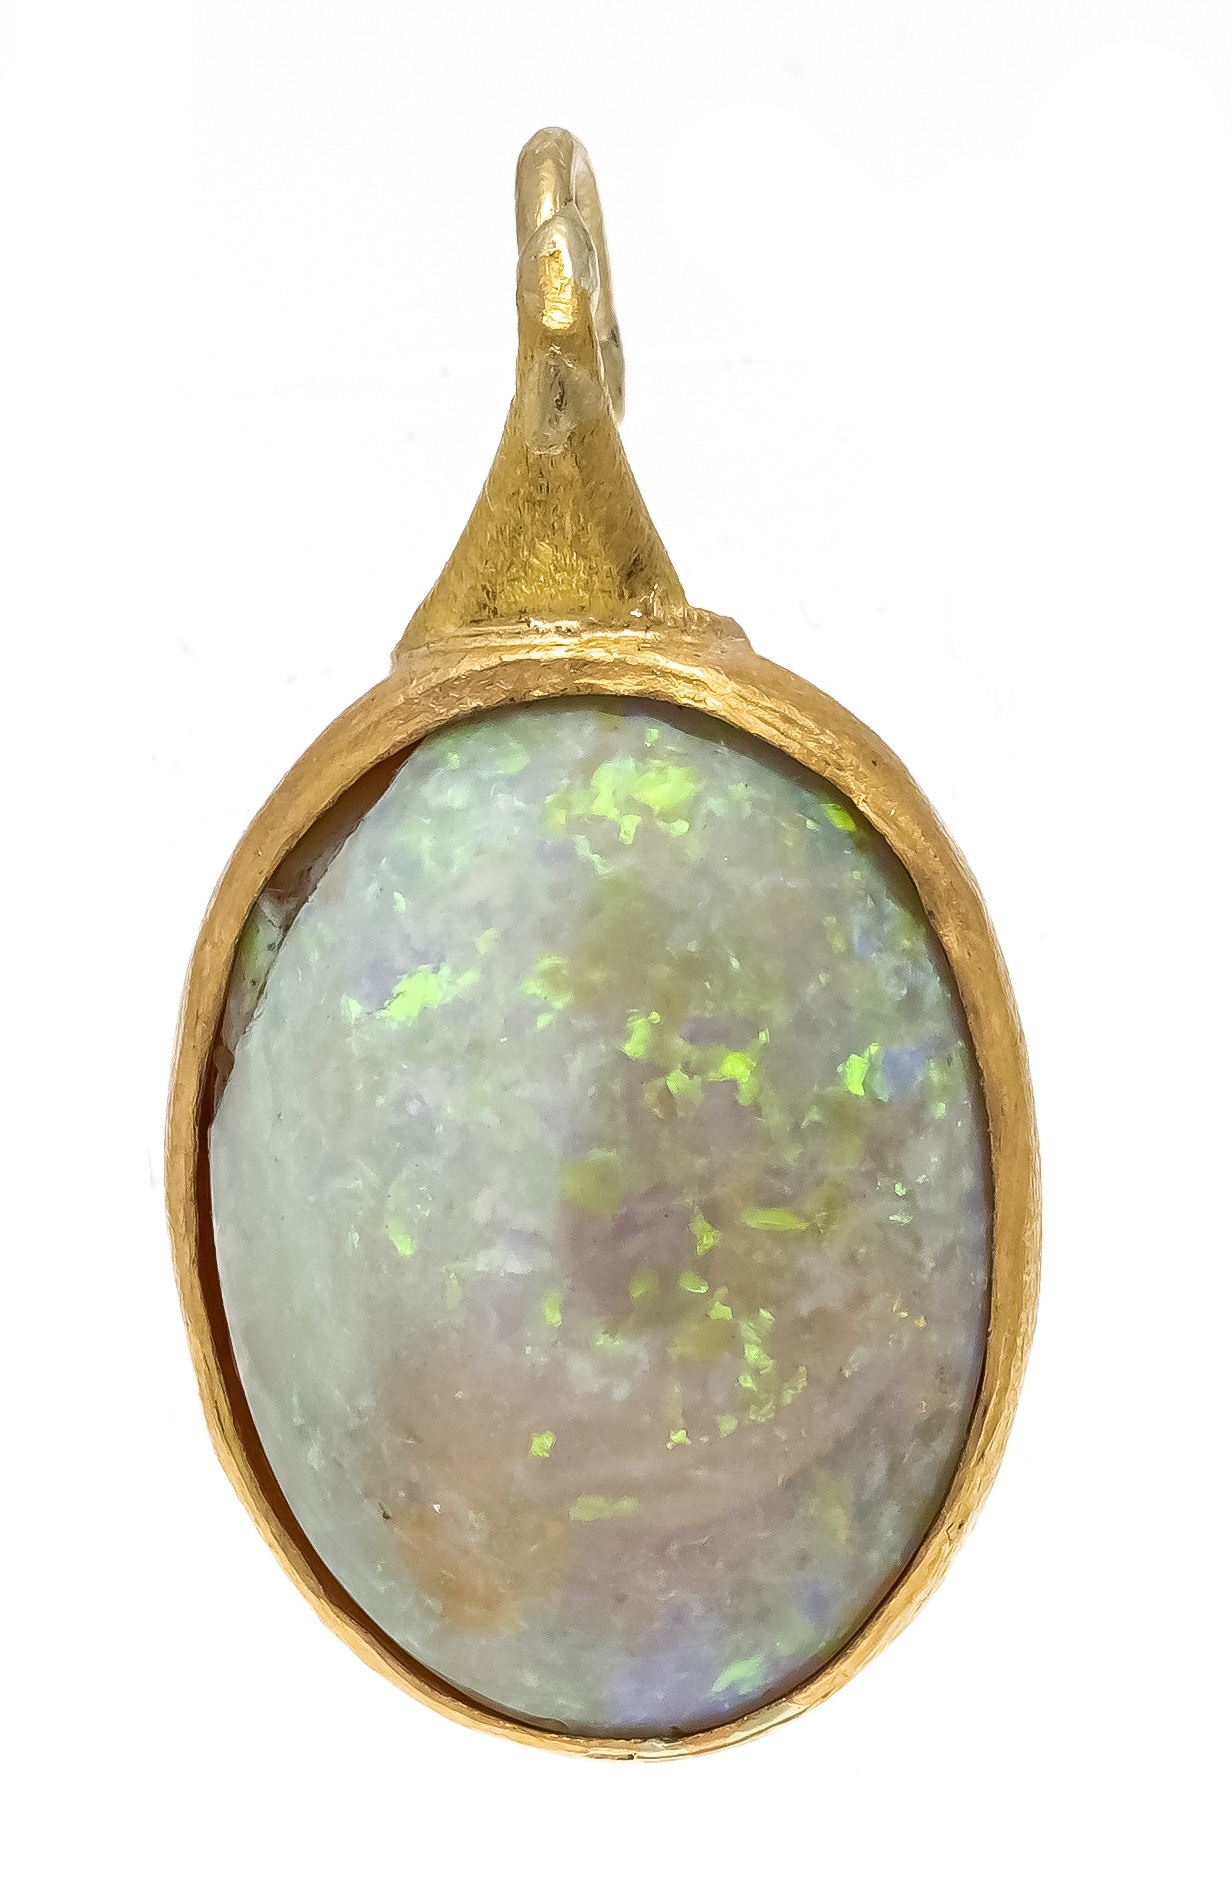 Opal pendant GG 750/000 matted, with an oval milopal cabochon 14.5 x 10.8 mm, good play of colors, a